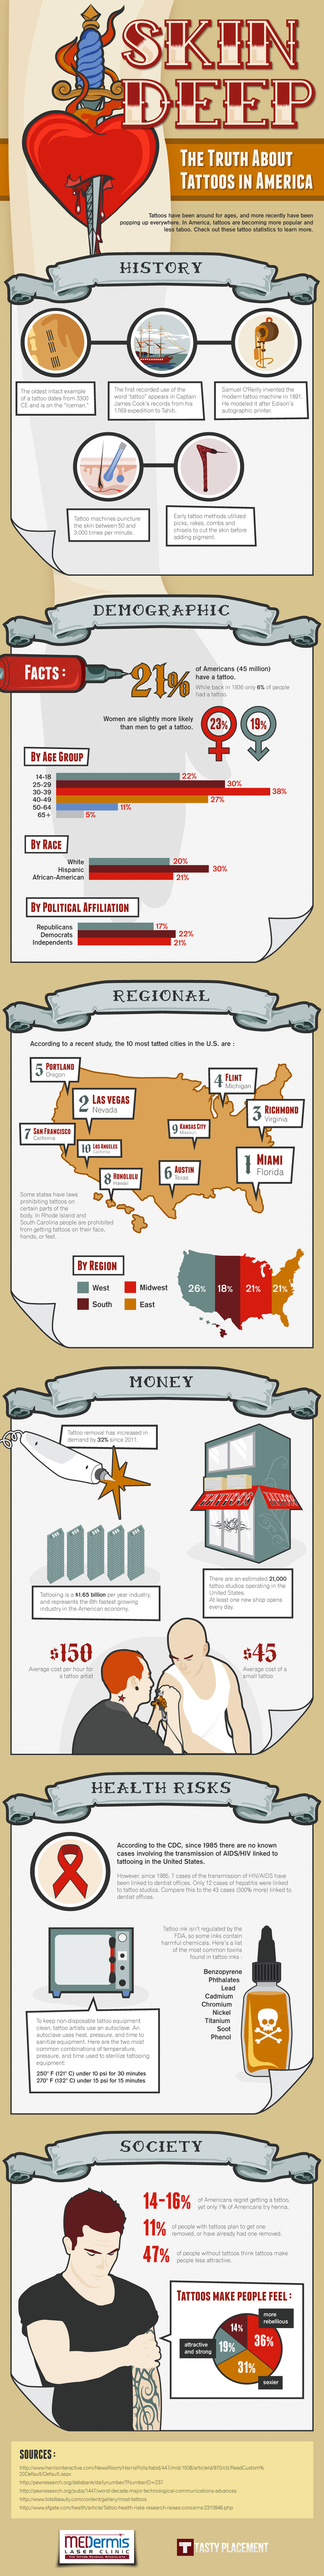 Free Tattoo Infographic: The Truth About Tattoos in America